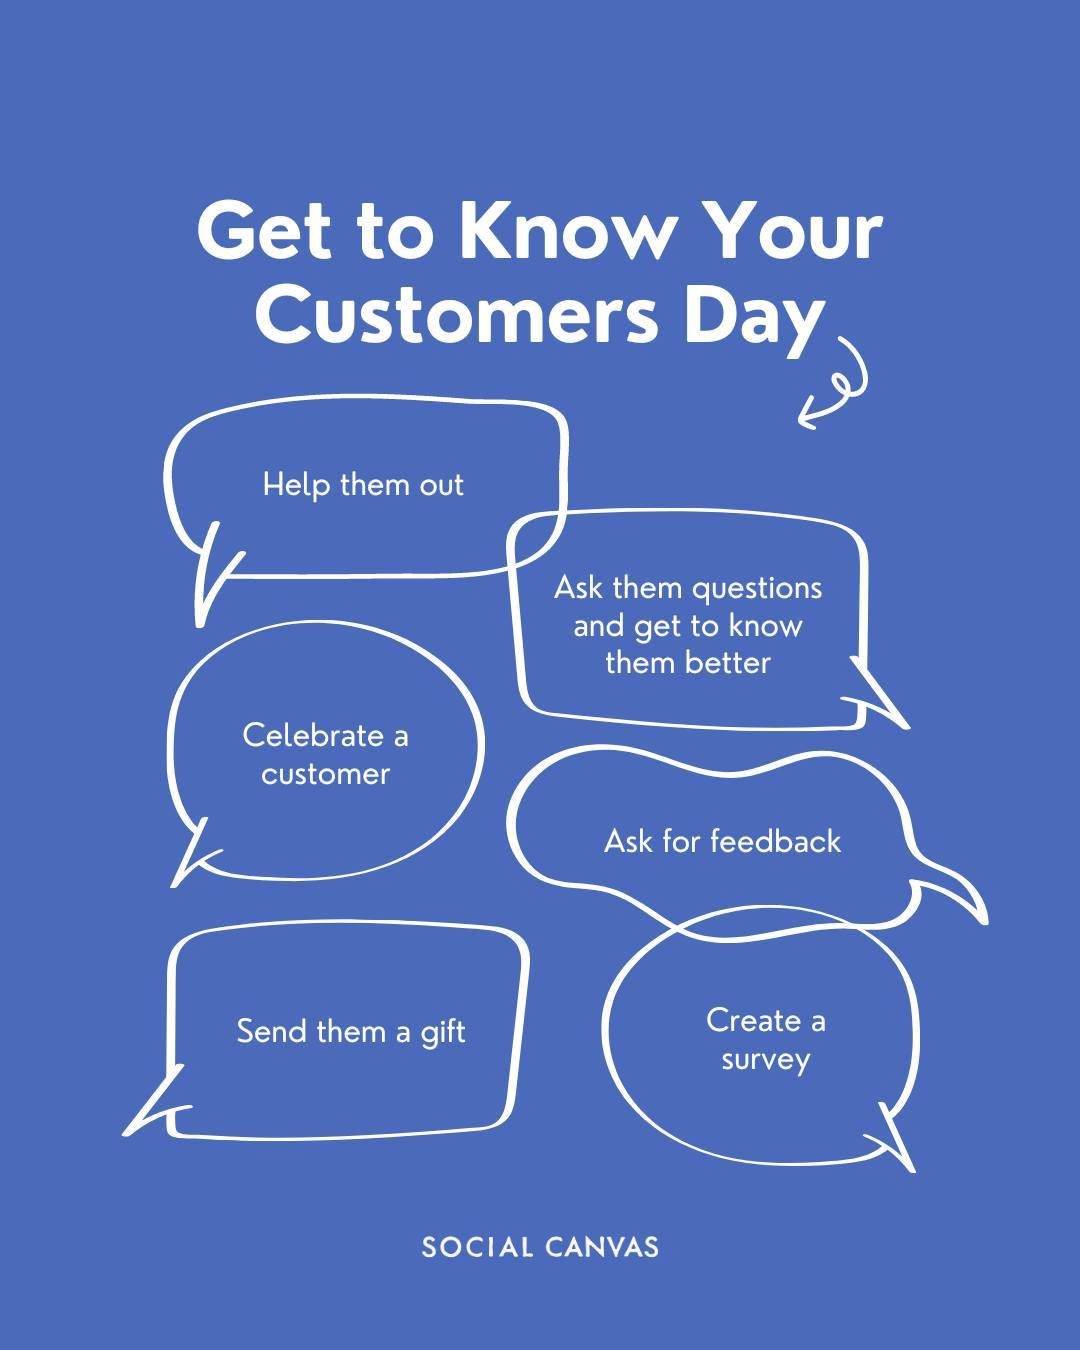 Happy Get to Know Your Customers Day! 🌟 Is the perfect time for small business owners to show some love to their amazing customers. Understanding their needs, preferences, and interests helps us create better products and services. Check out our blo